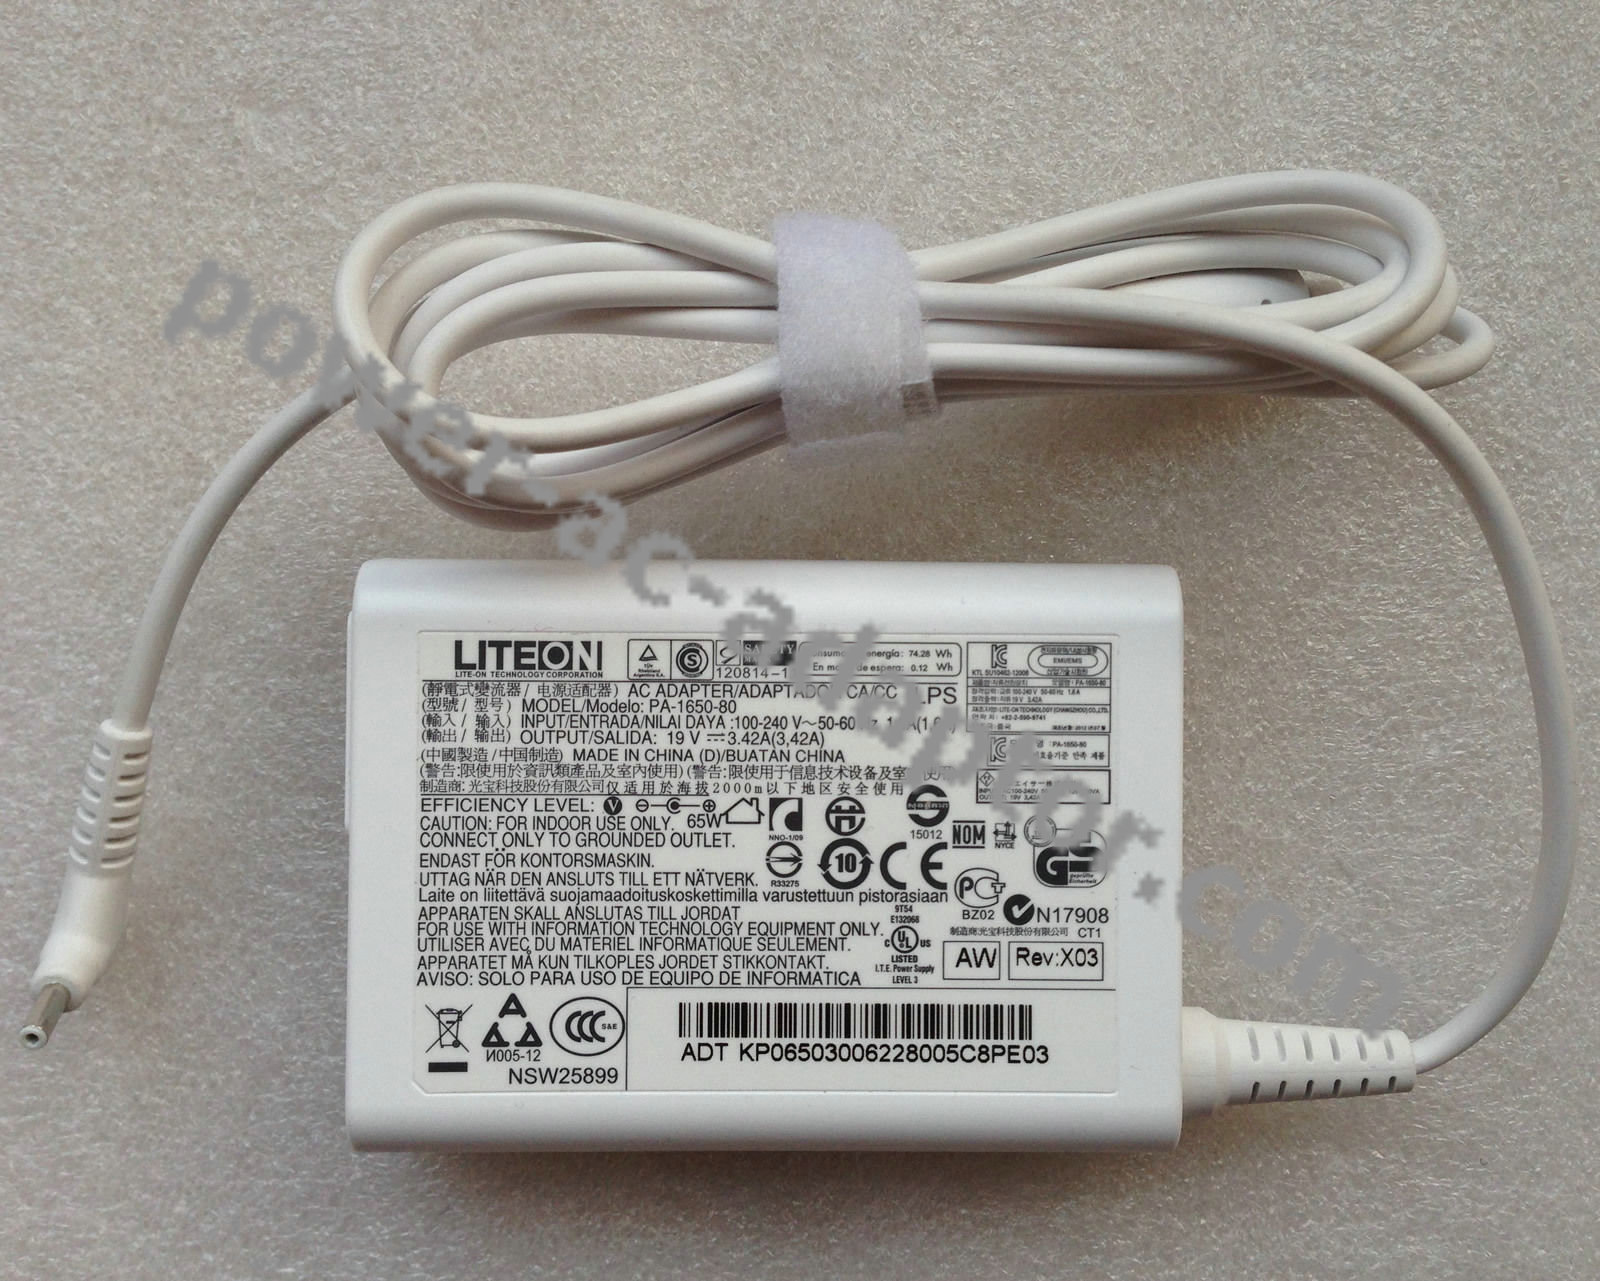 19V 3.42A Acer KP.06503.007 KP.06503.006 AC Power Adapter white